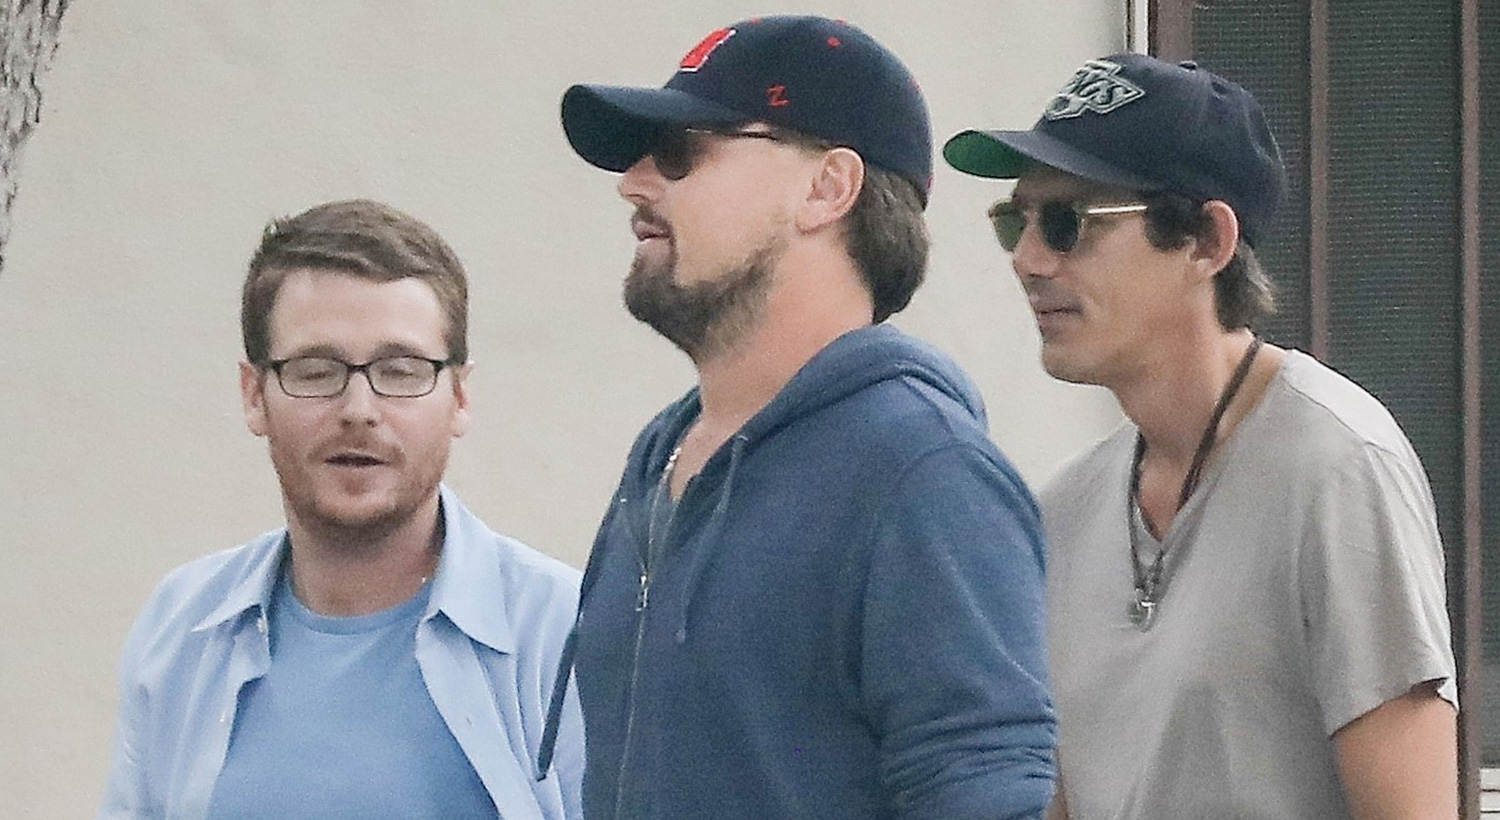 Leonardo DiCaprio Supports Tobey Maguire’s Daughter with His Best...